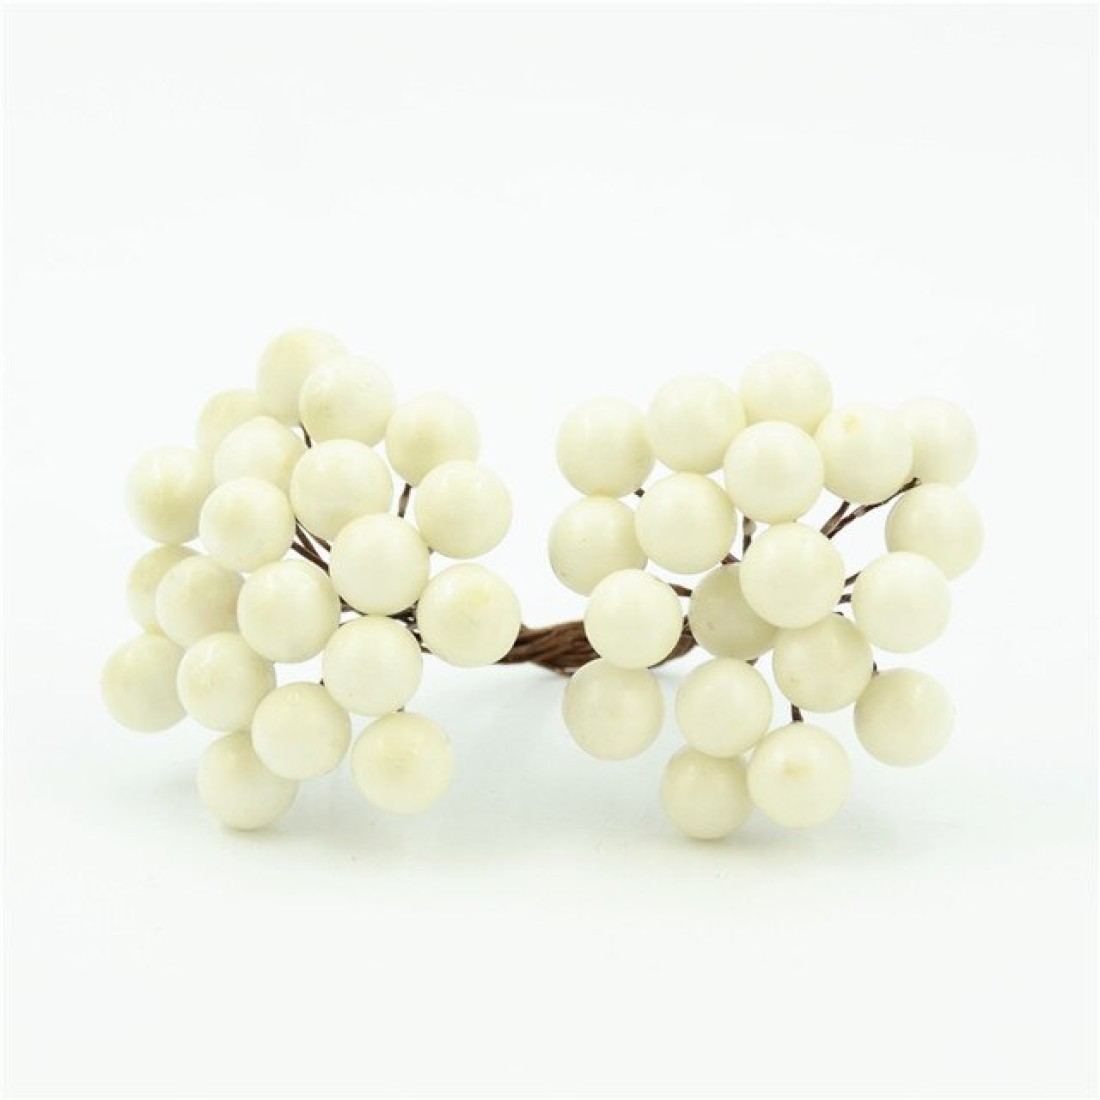 Craftyscrappers HOLLY BERRY POLLENS - IVORY